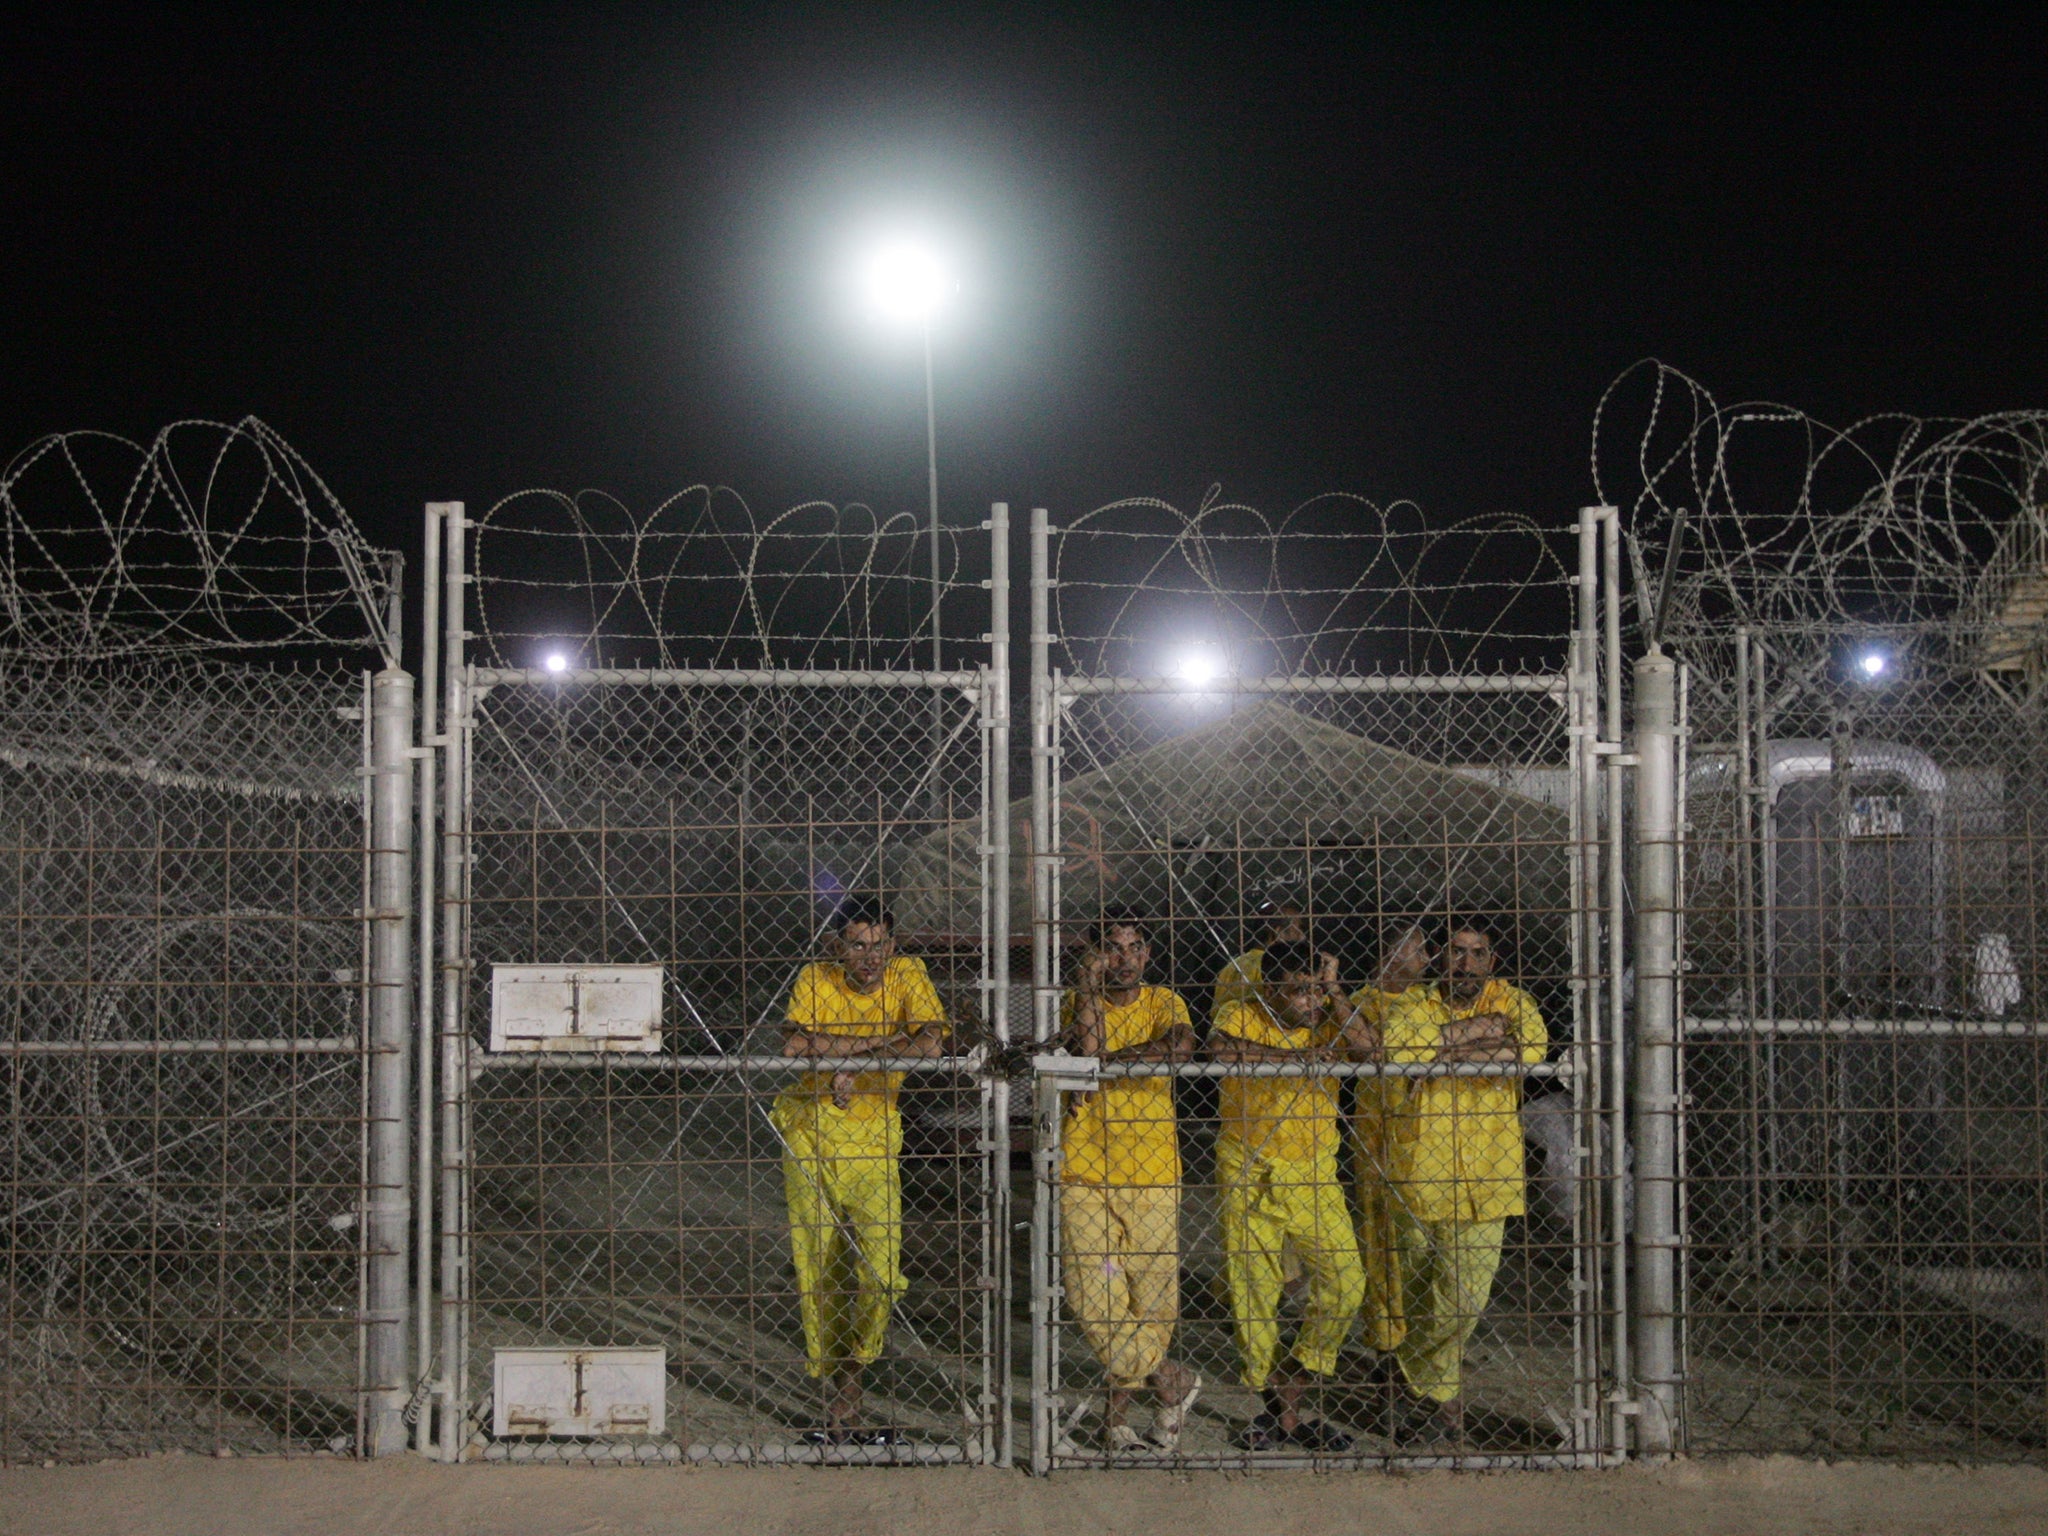 Iraqi detainees stand behind a fence at the Camp Bucca detention centre, located near the Kuwait-Iraq border